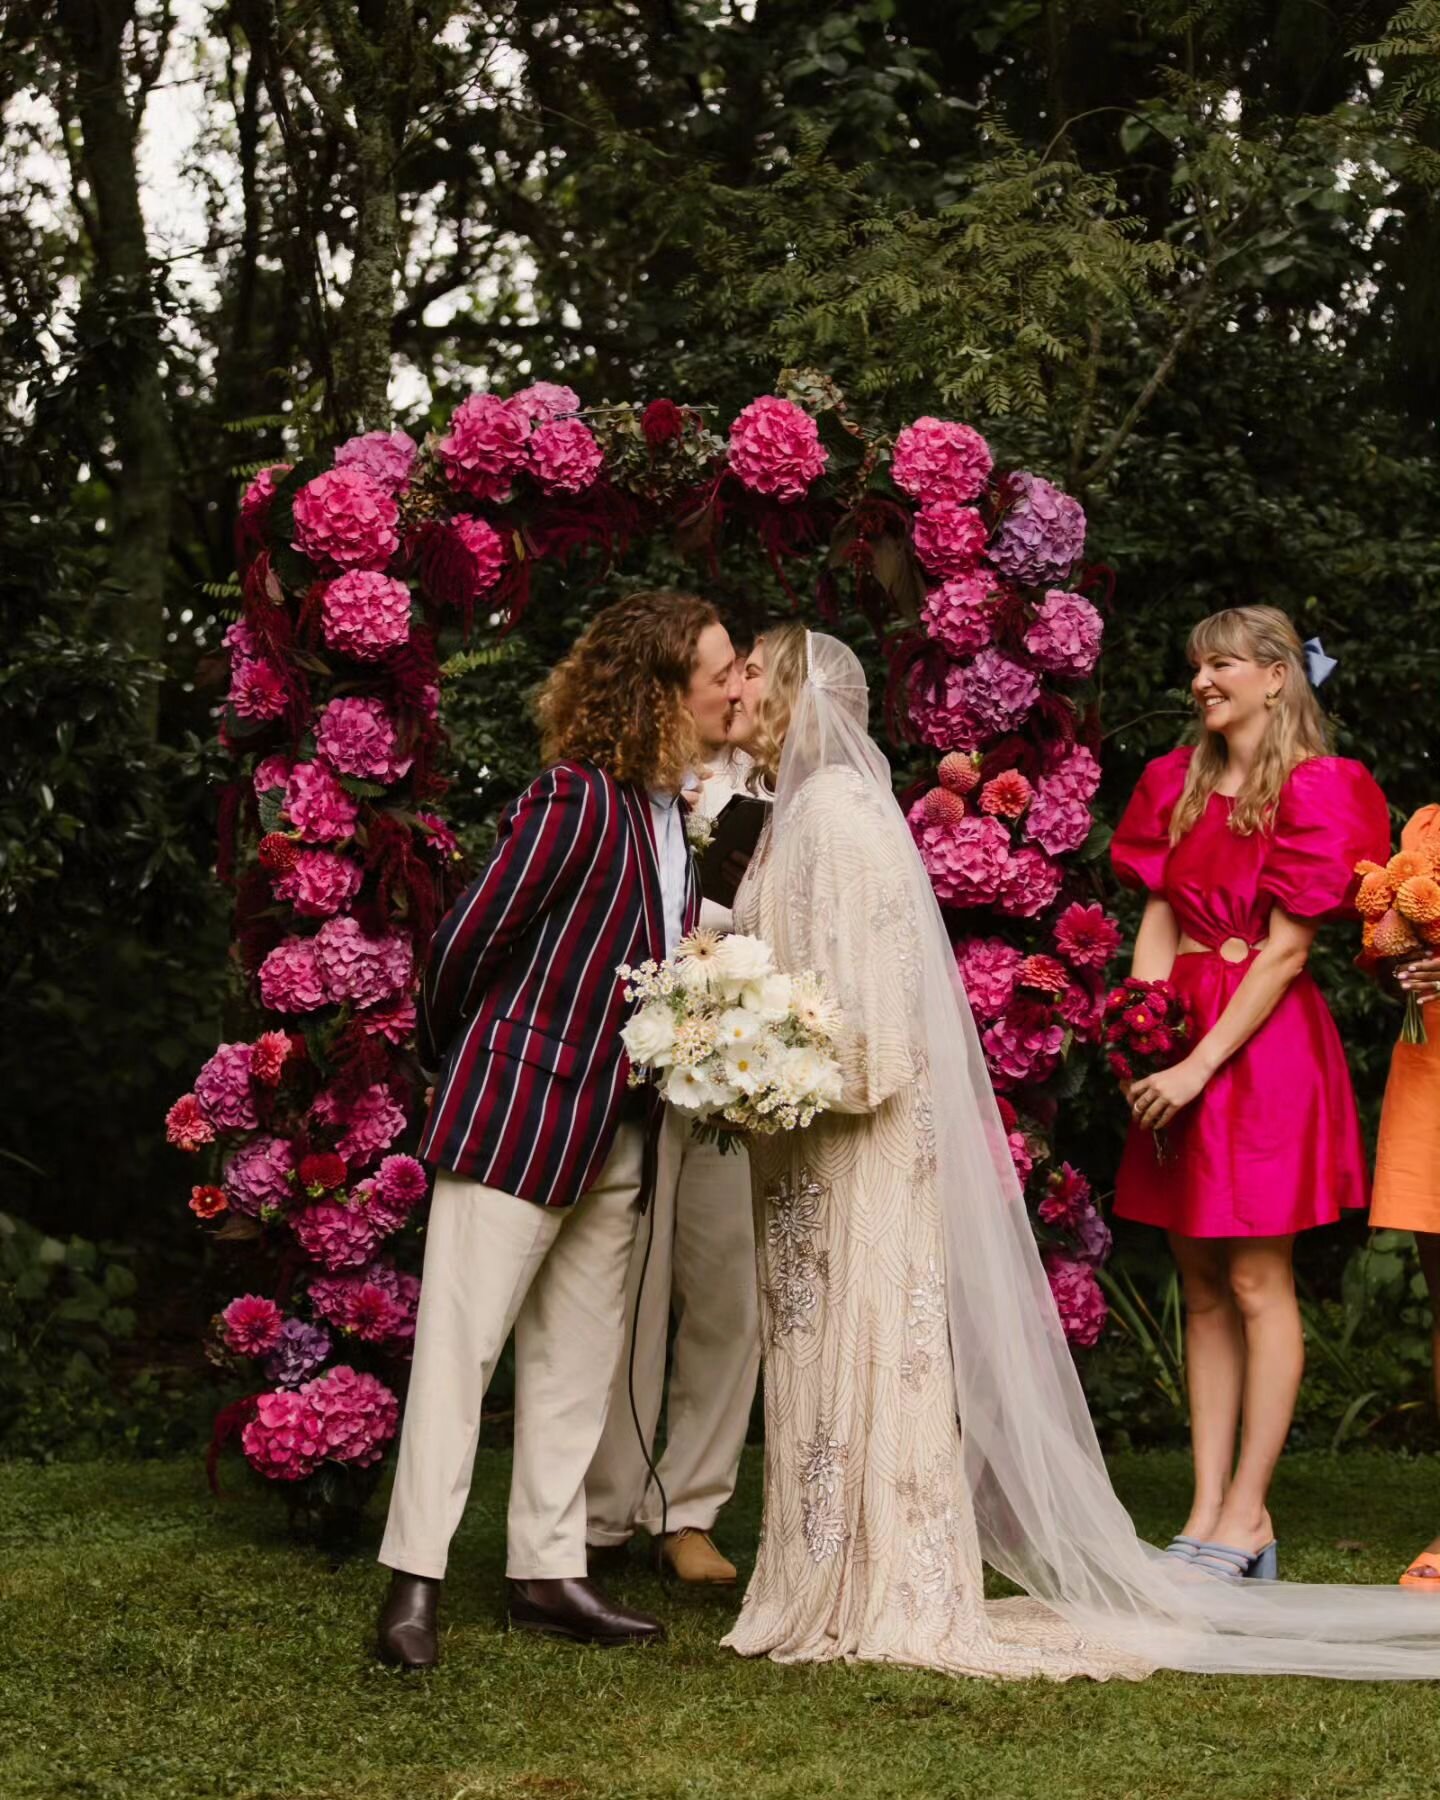 Arch of cerise dreams. We used the most incredible hydranges, a combination of dahlias and plenty of amaranthus. All foam free 🙌 .. &gt;&gt;

Cover image @aimeekellyphotography 

#weddingflowerinspiration #bridalflowers #bridesbouquet #ceremonyflowe